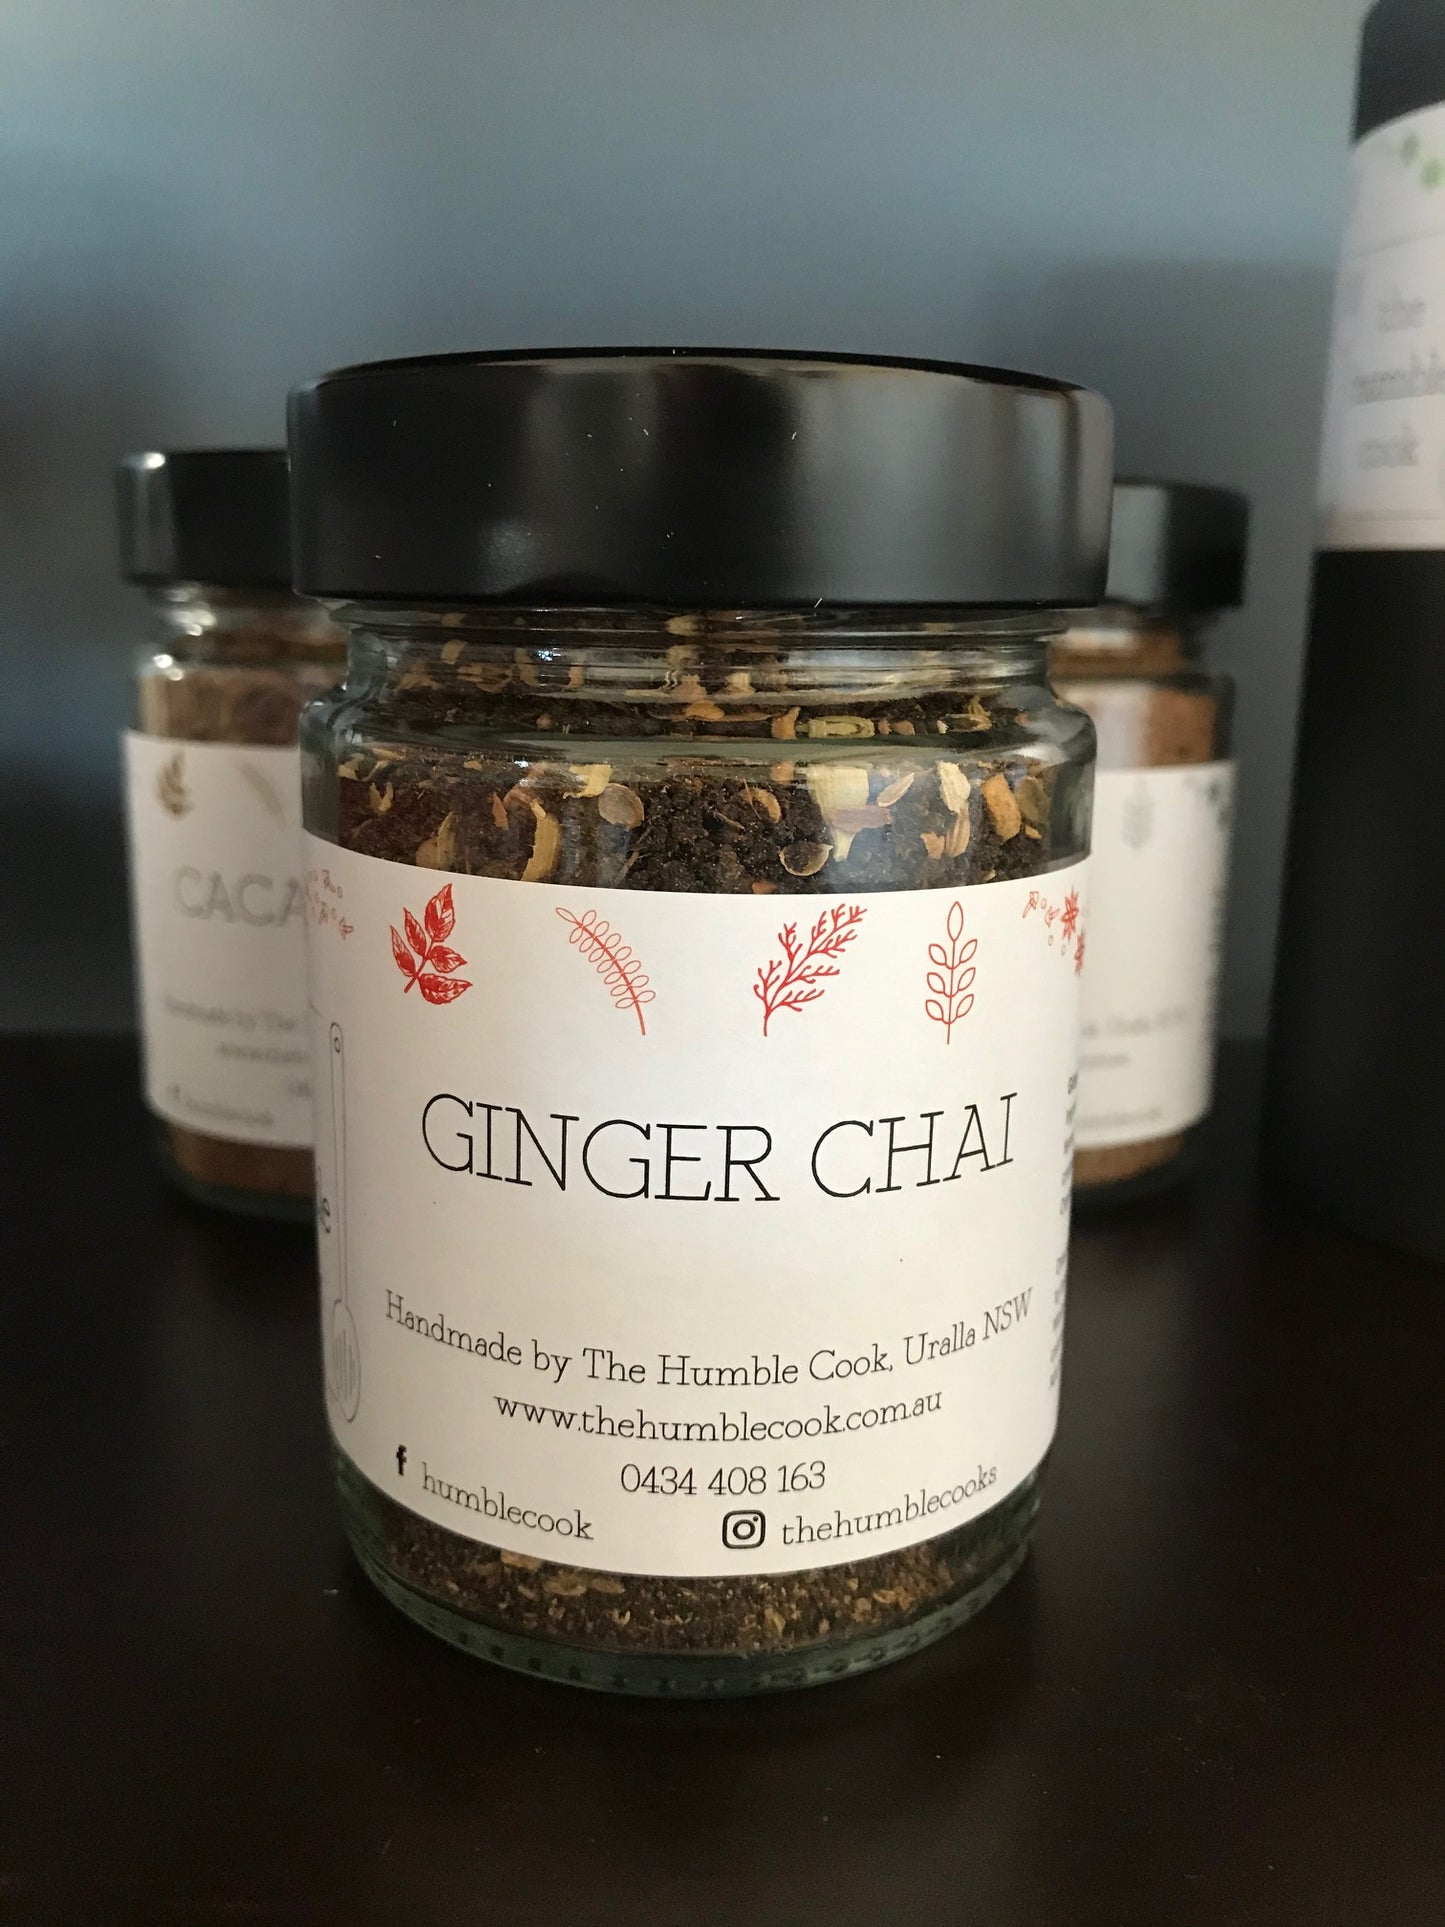 Ginger Chai by The Humble Cook